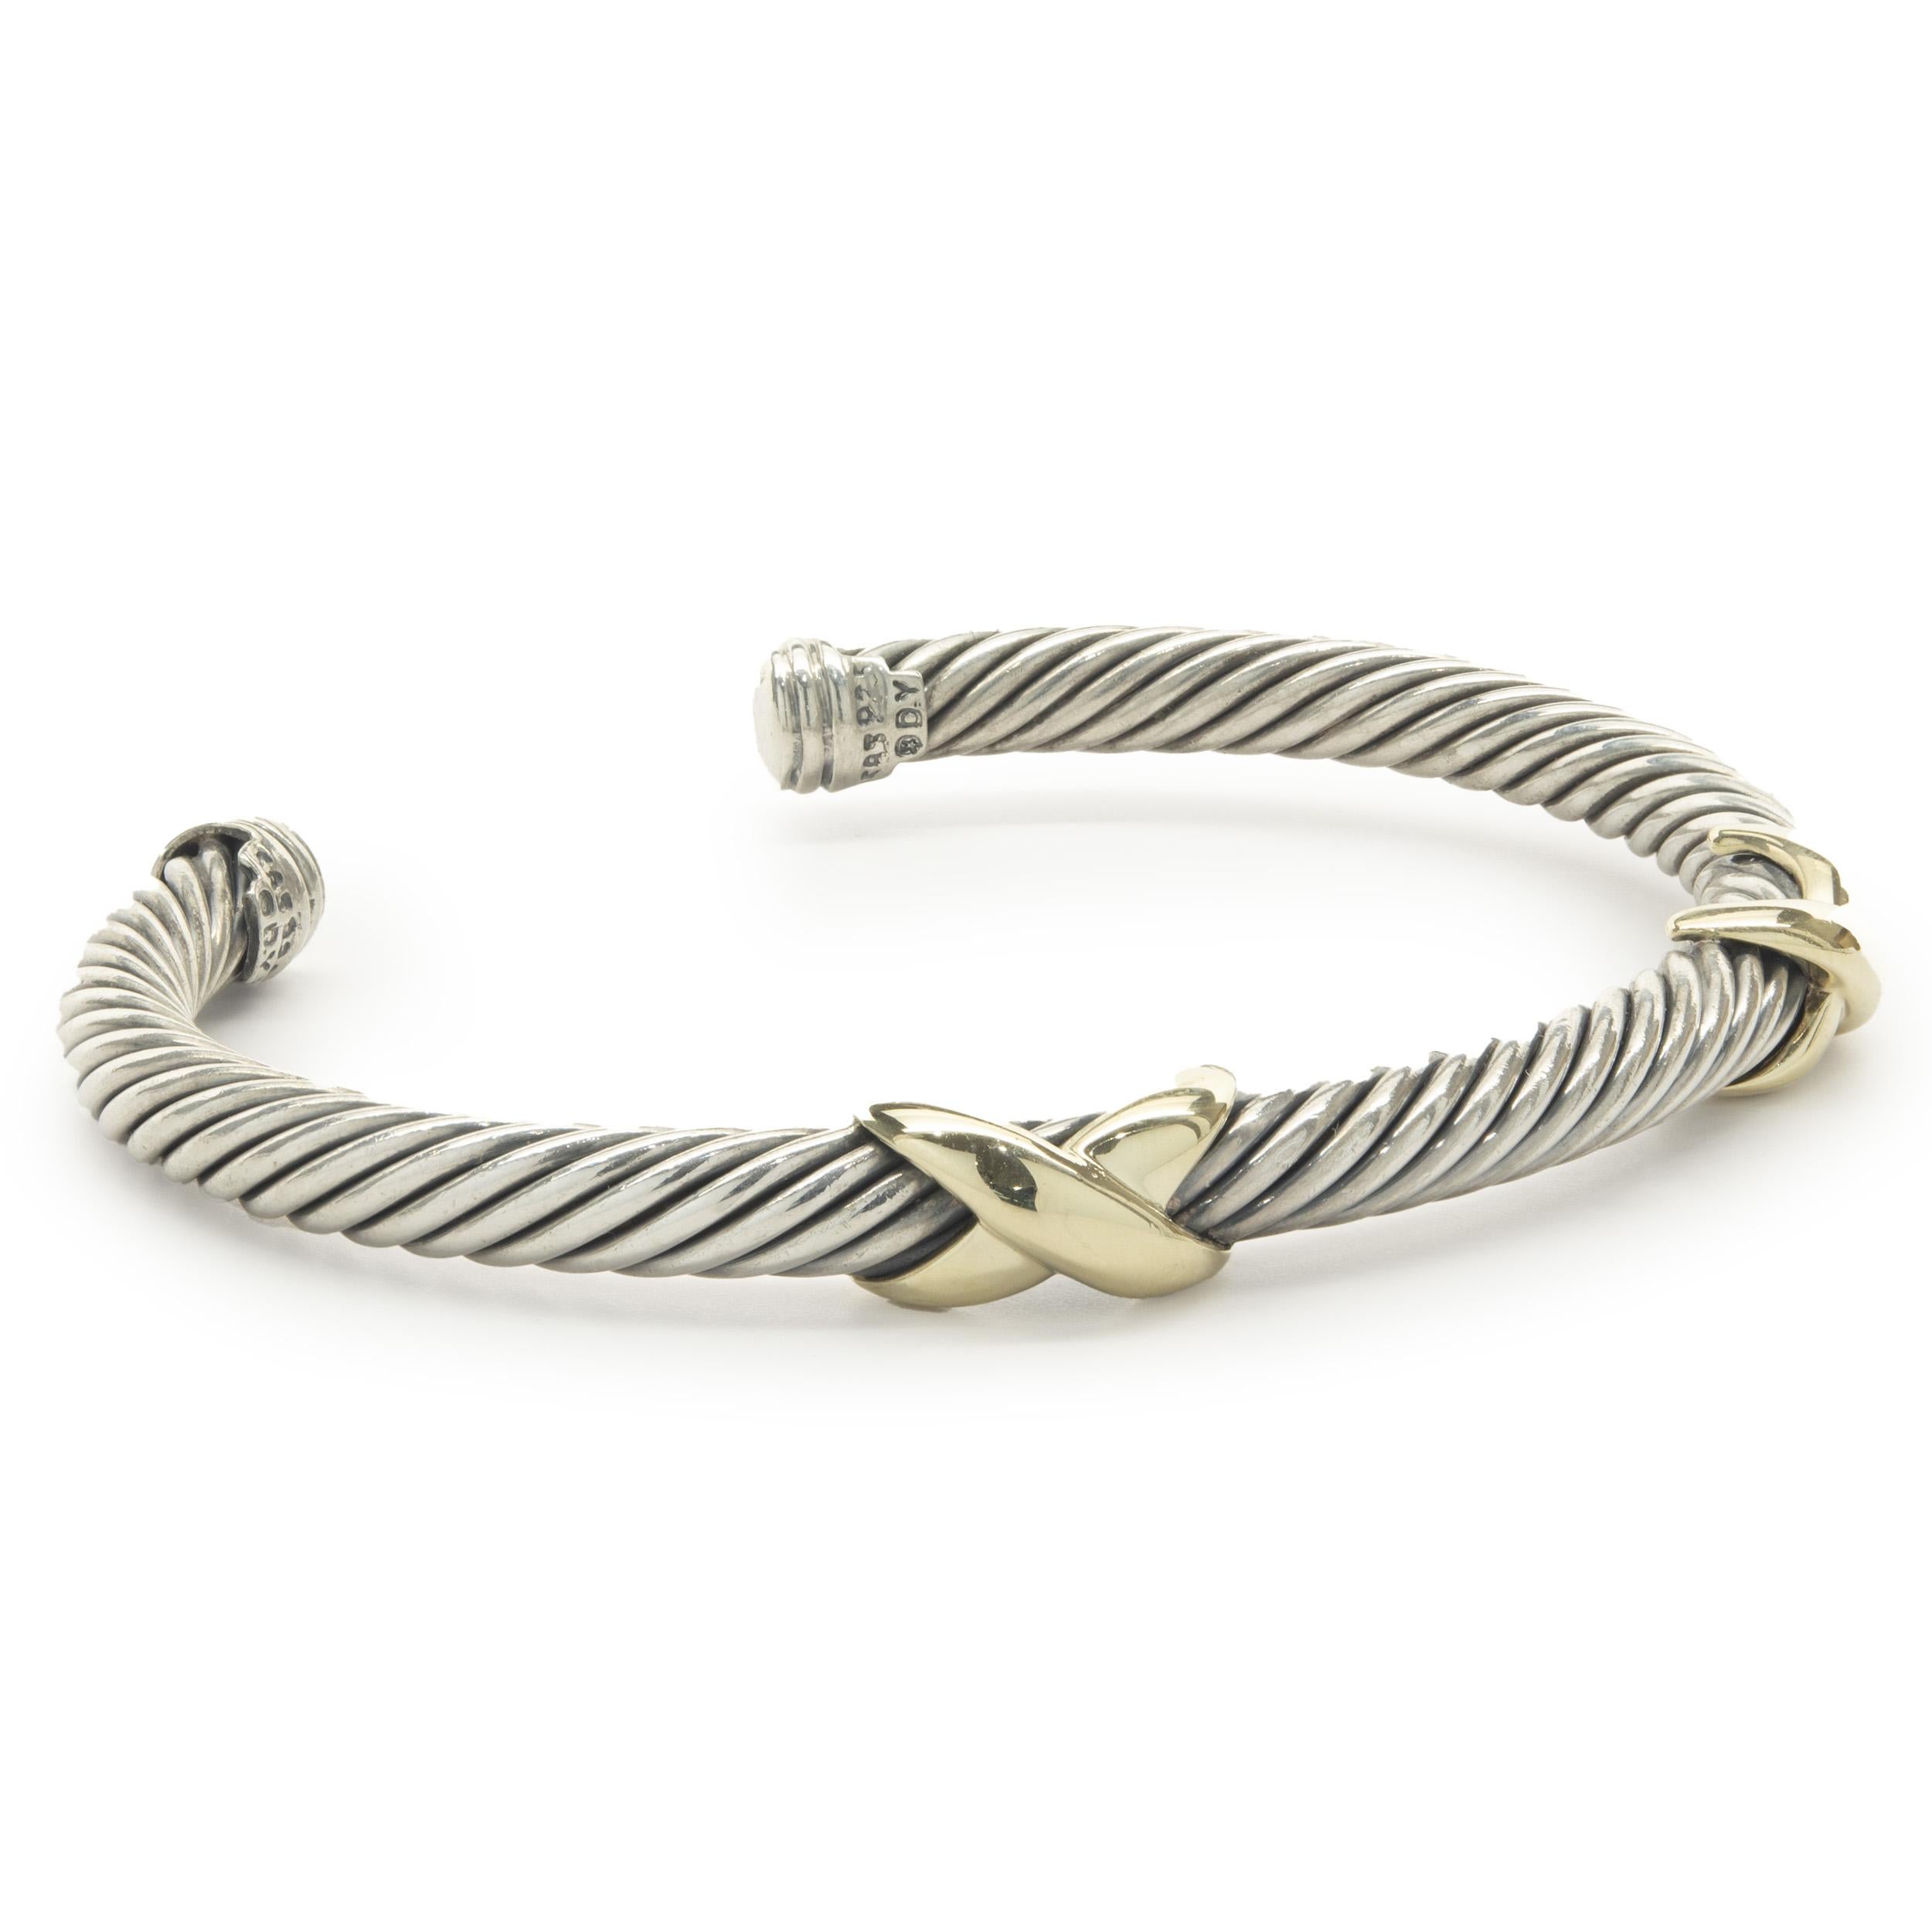 Designer: David Yurman
Material: Sterling Silver / 14K yellow gold
Dimensions: bracelet will fit a 6.5-inch wrist
Weight: 28.37 grams